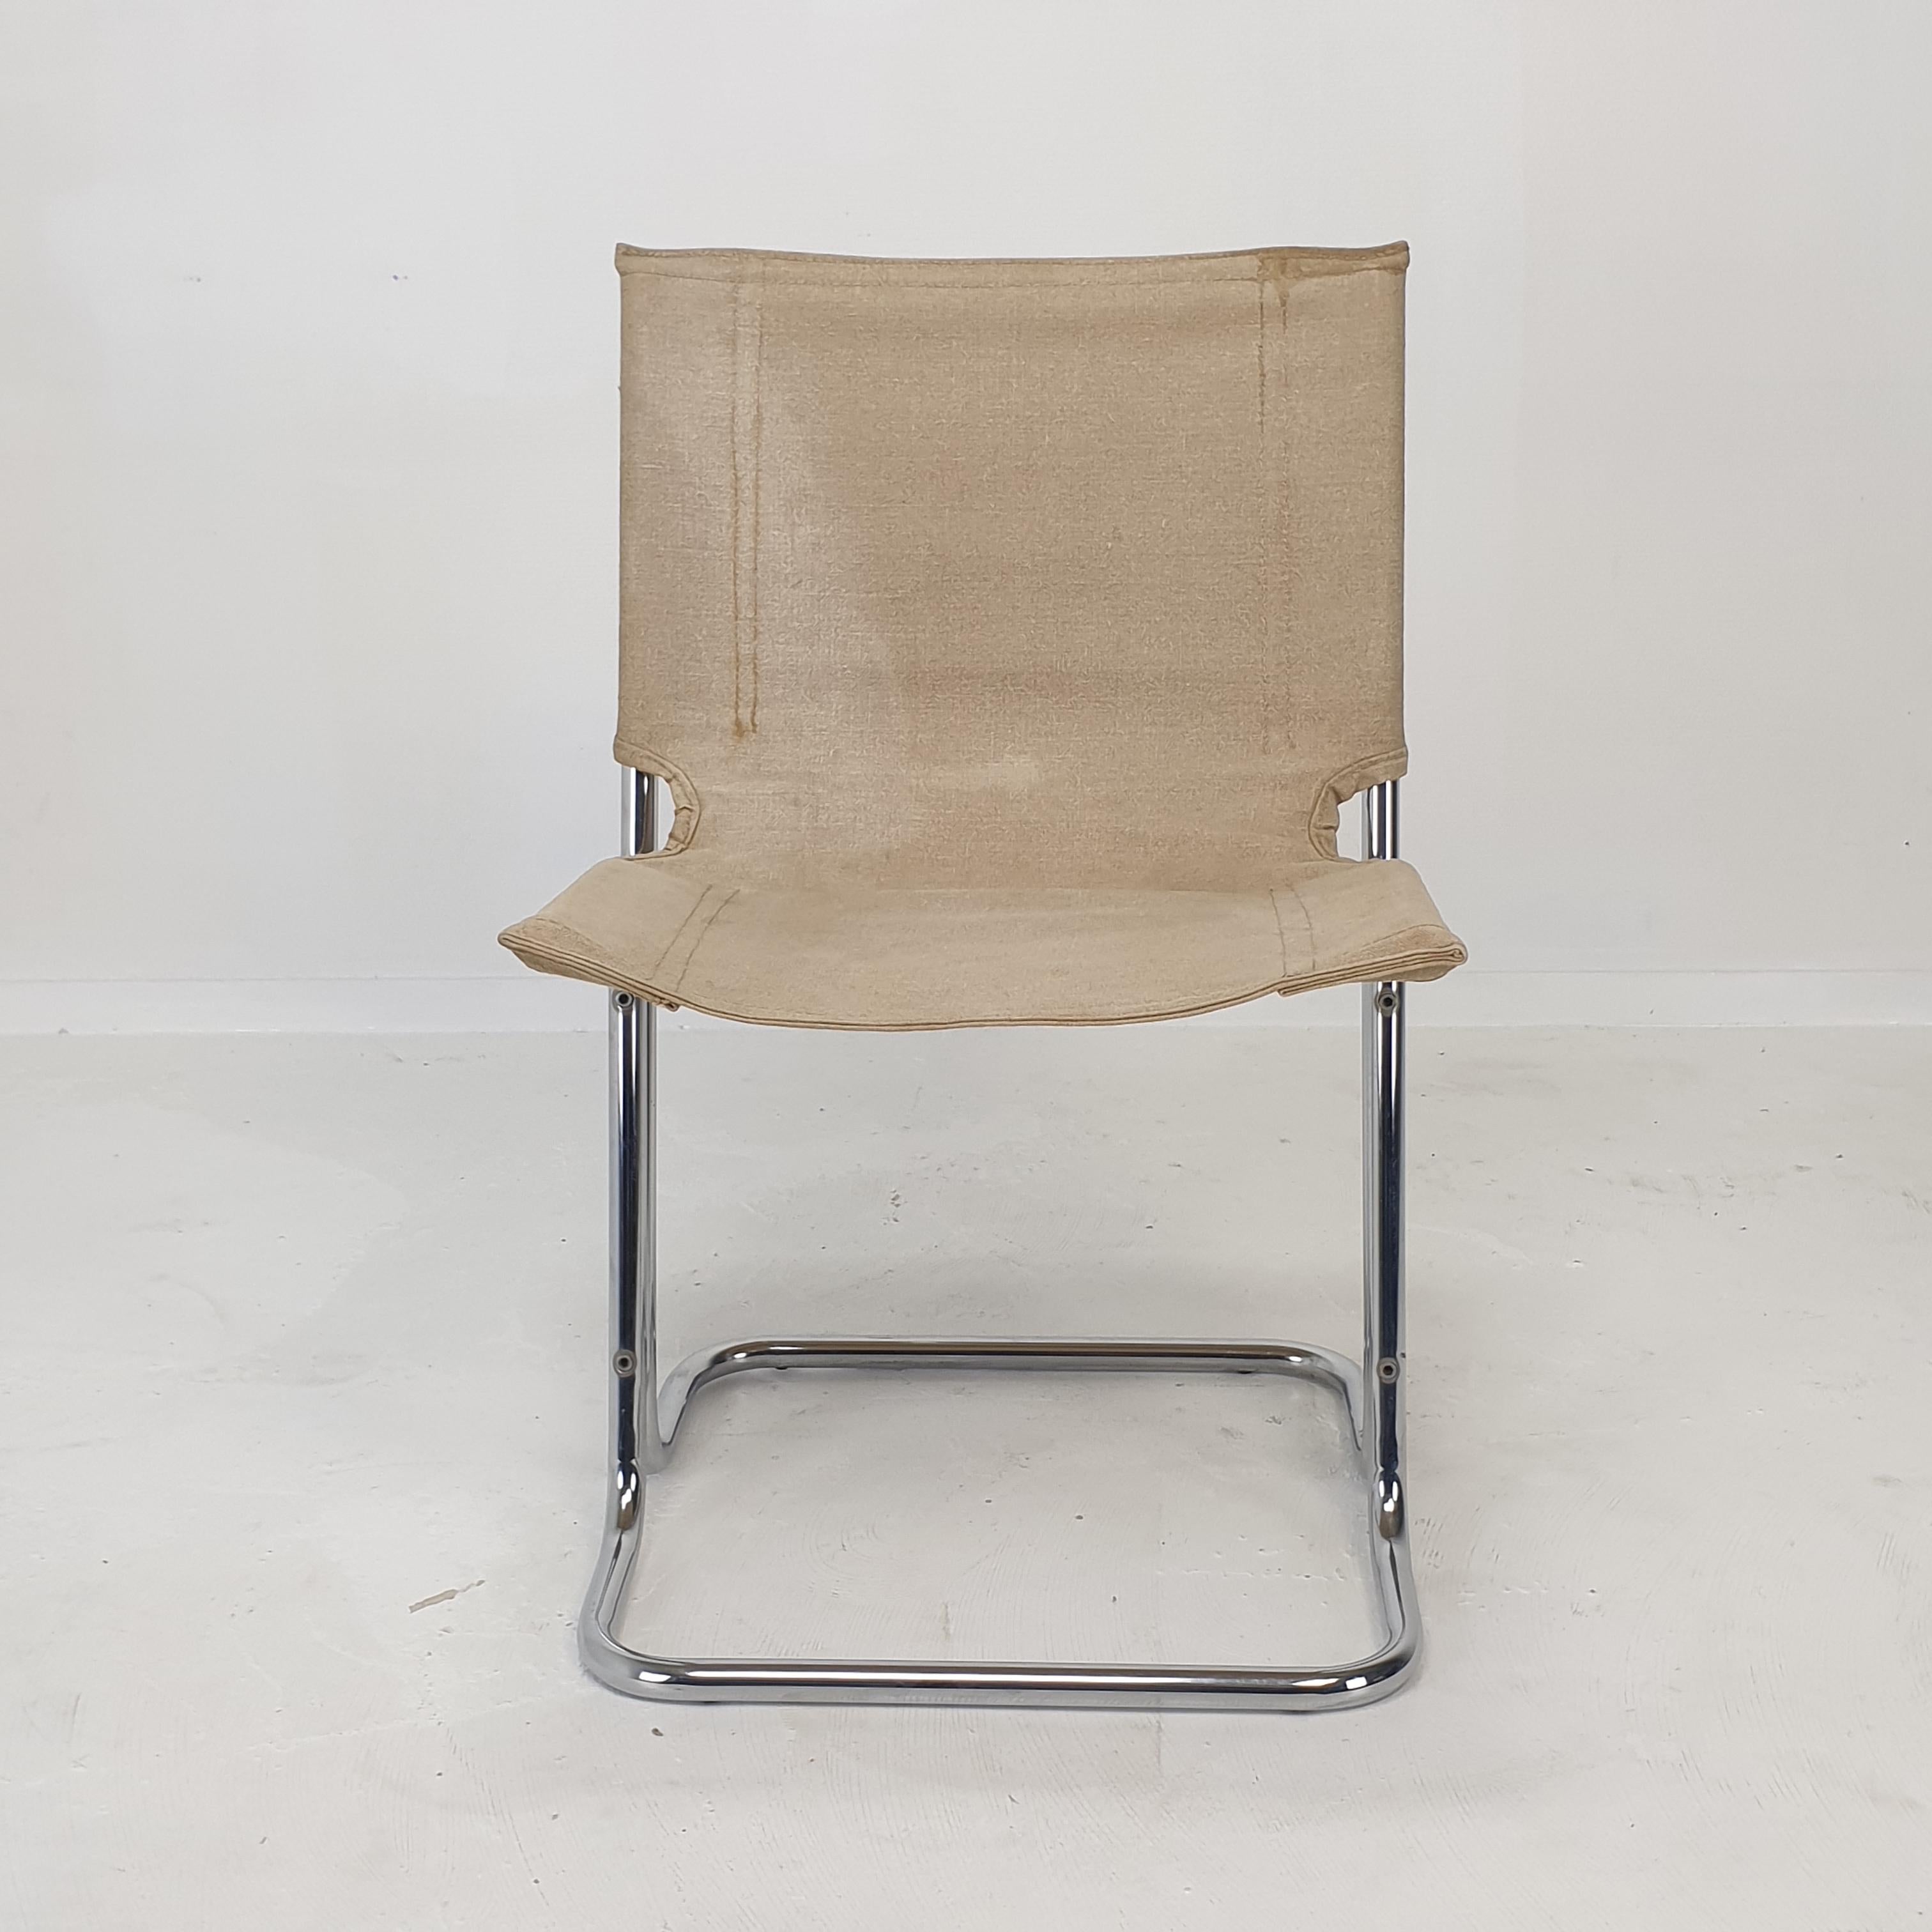 Set of 2 Italian Canvas and Chromed Metal Chairs, 1970's For Sale 2